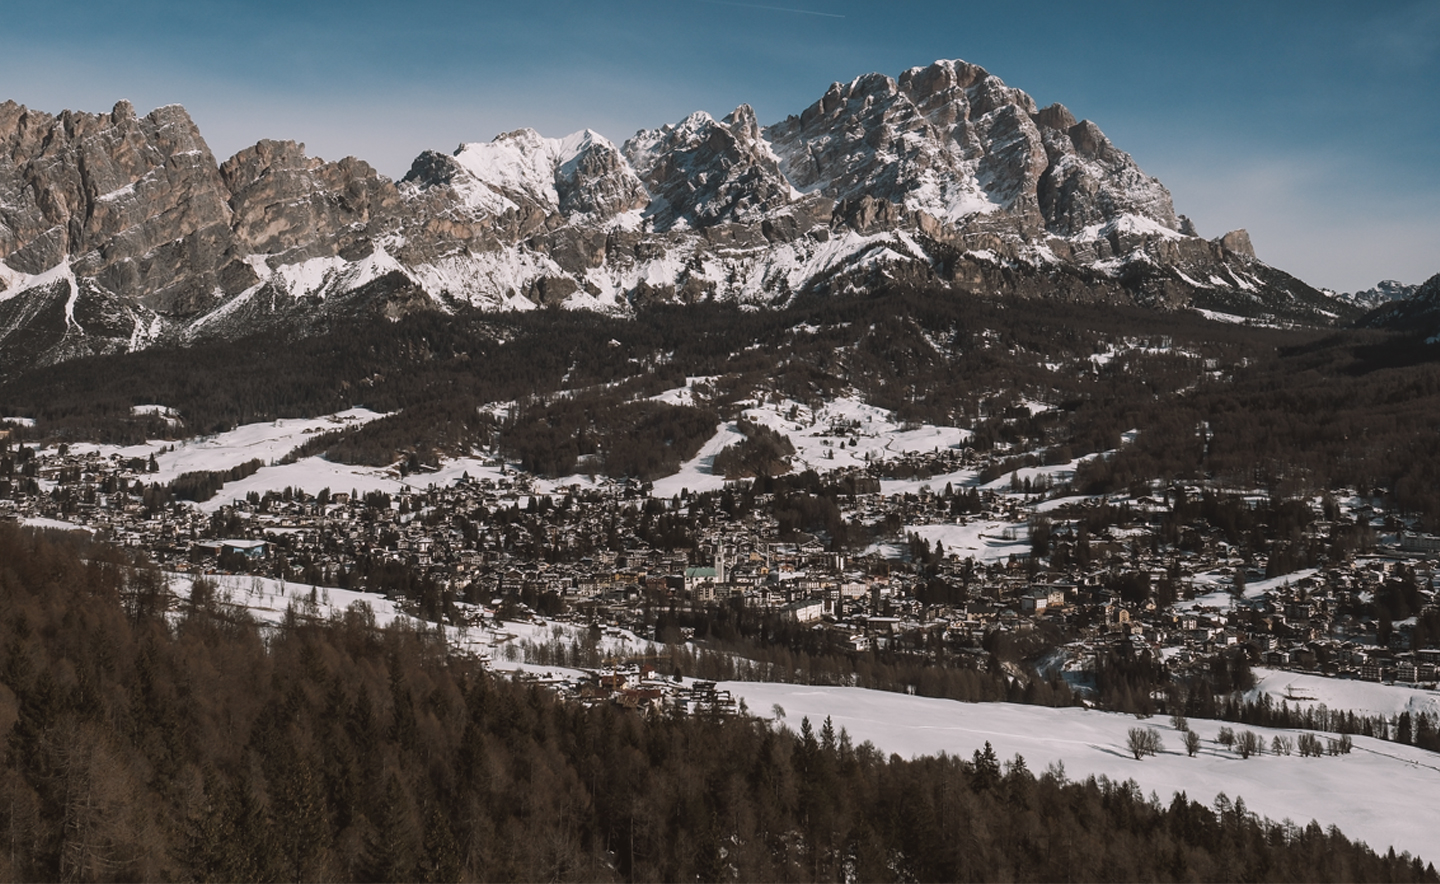 Impressive panorama of the snow-capped mountains of Cortina d'Ampezzo